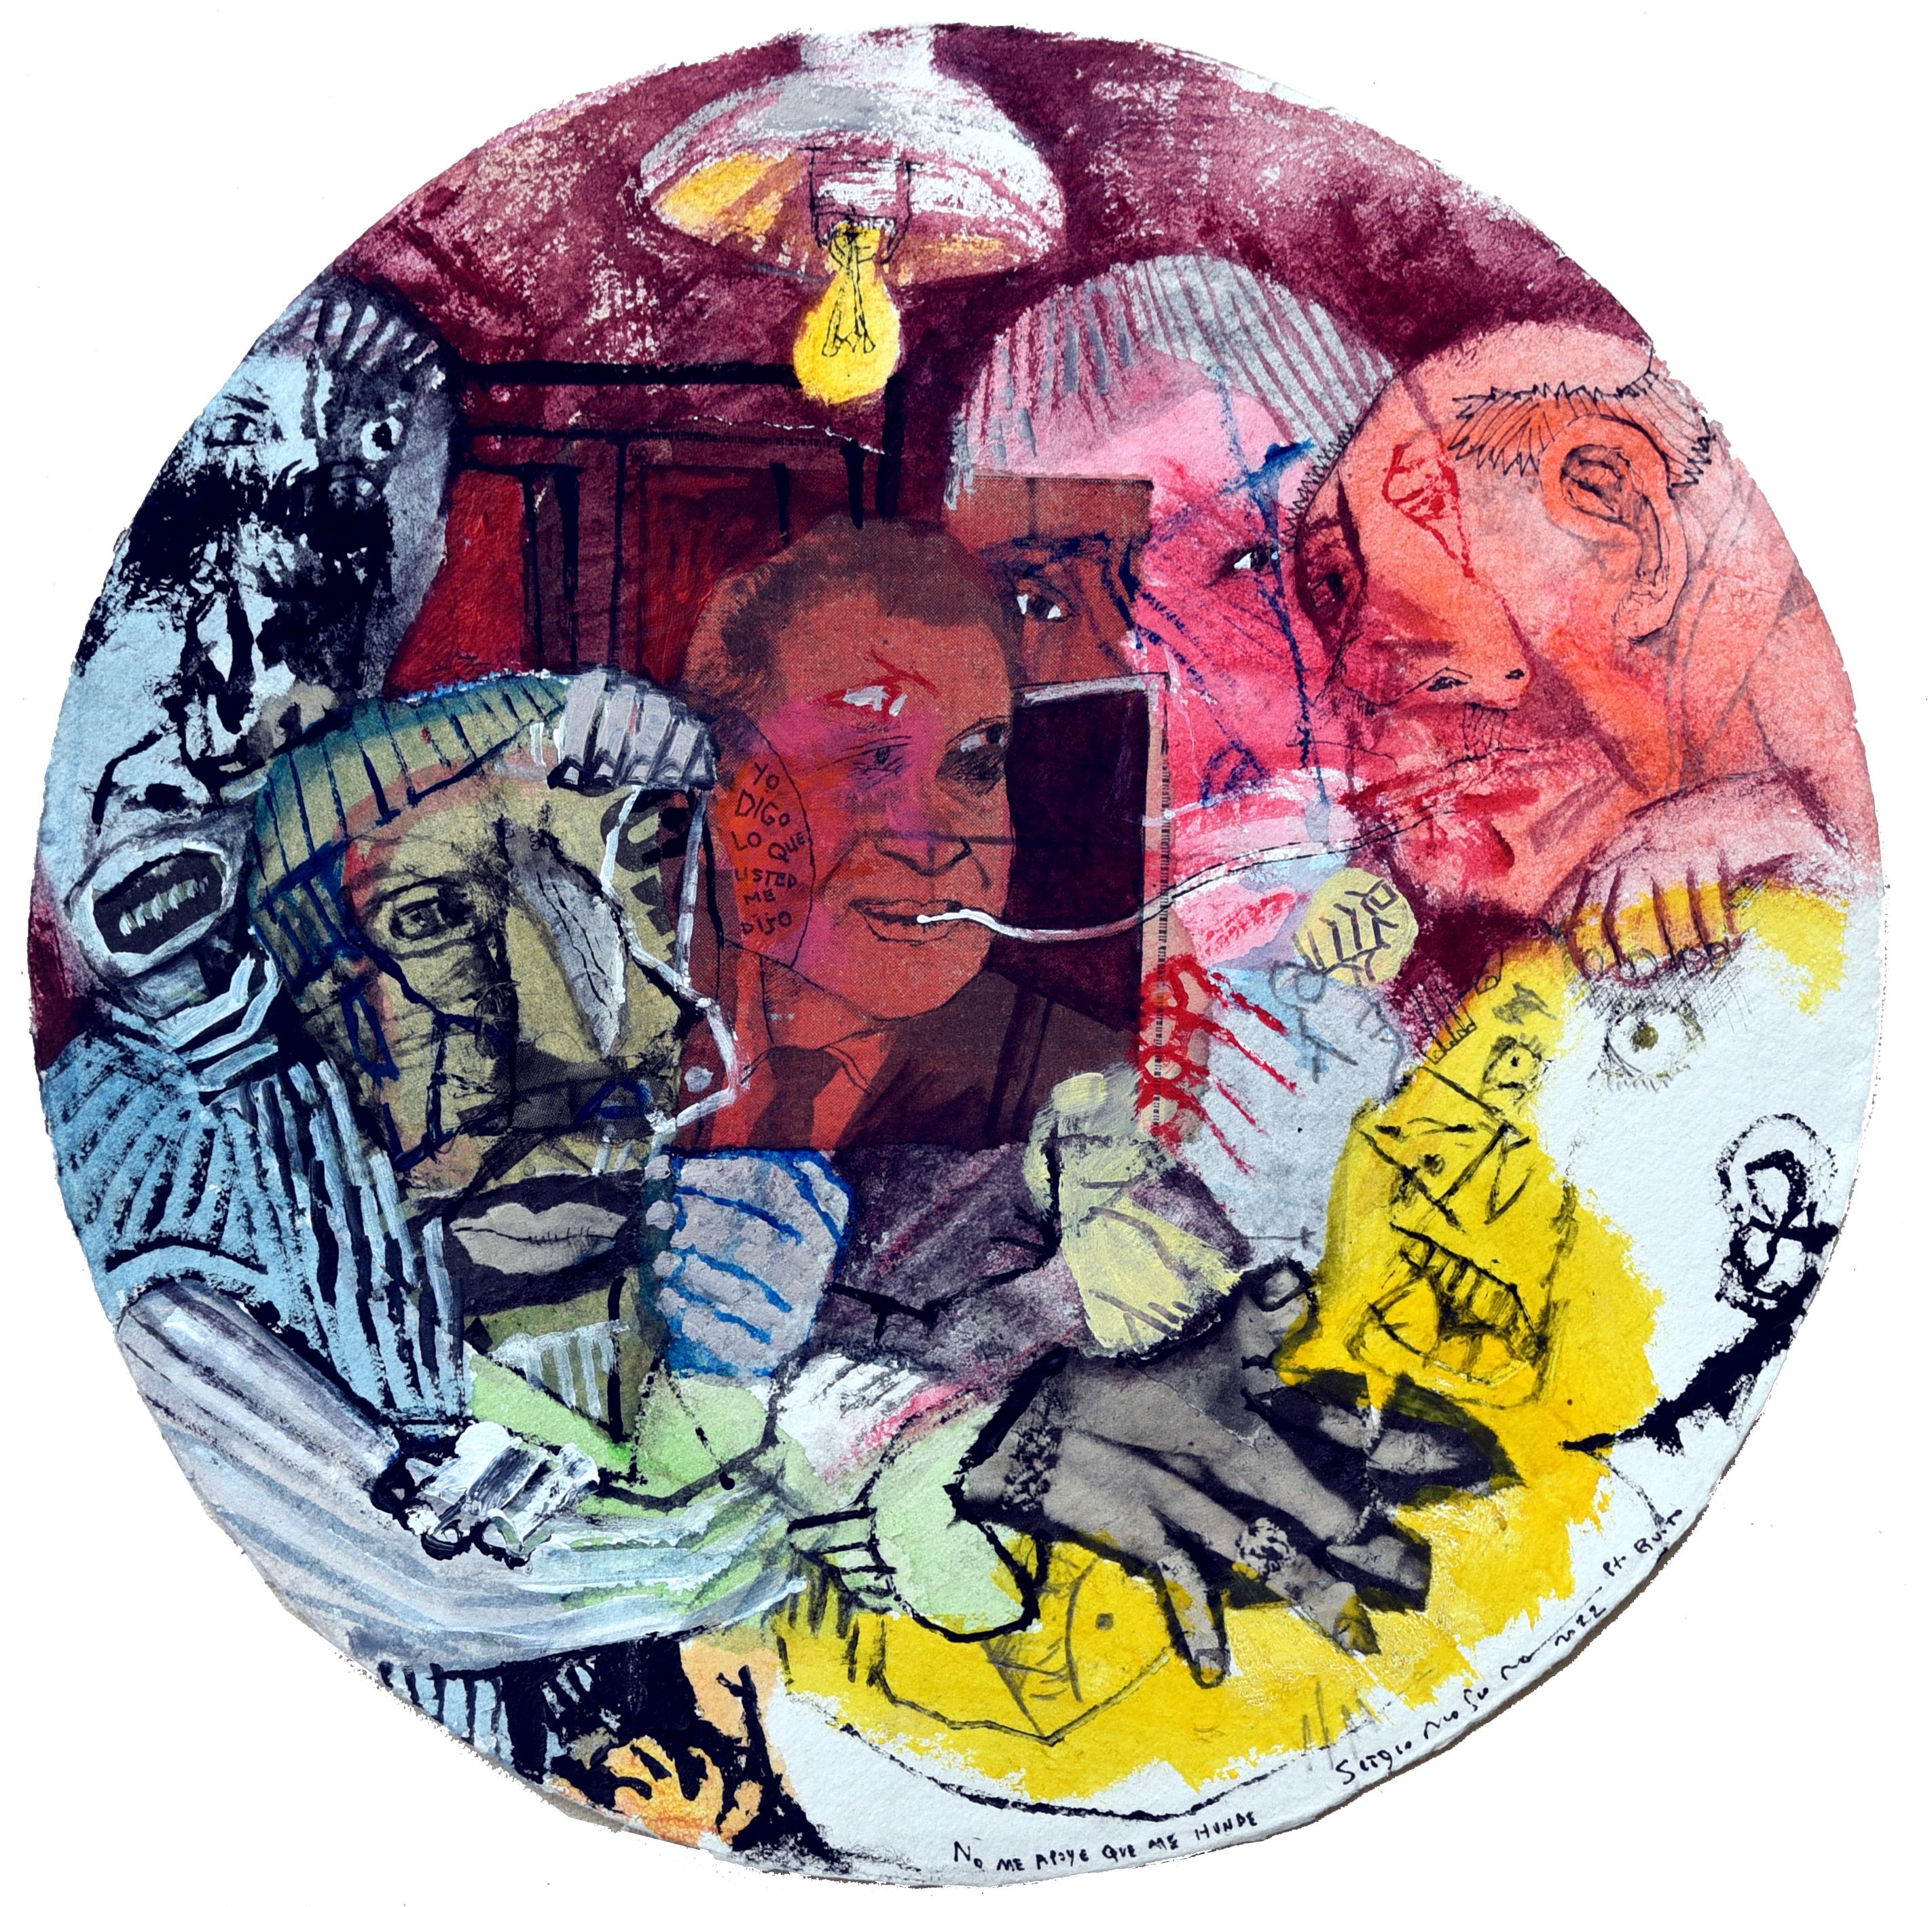 Acrylic paint and ink on paper
Tondo (diameter 30 cm)
Hand-signed and dated lower right
